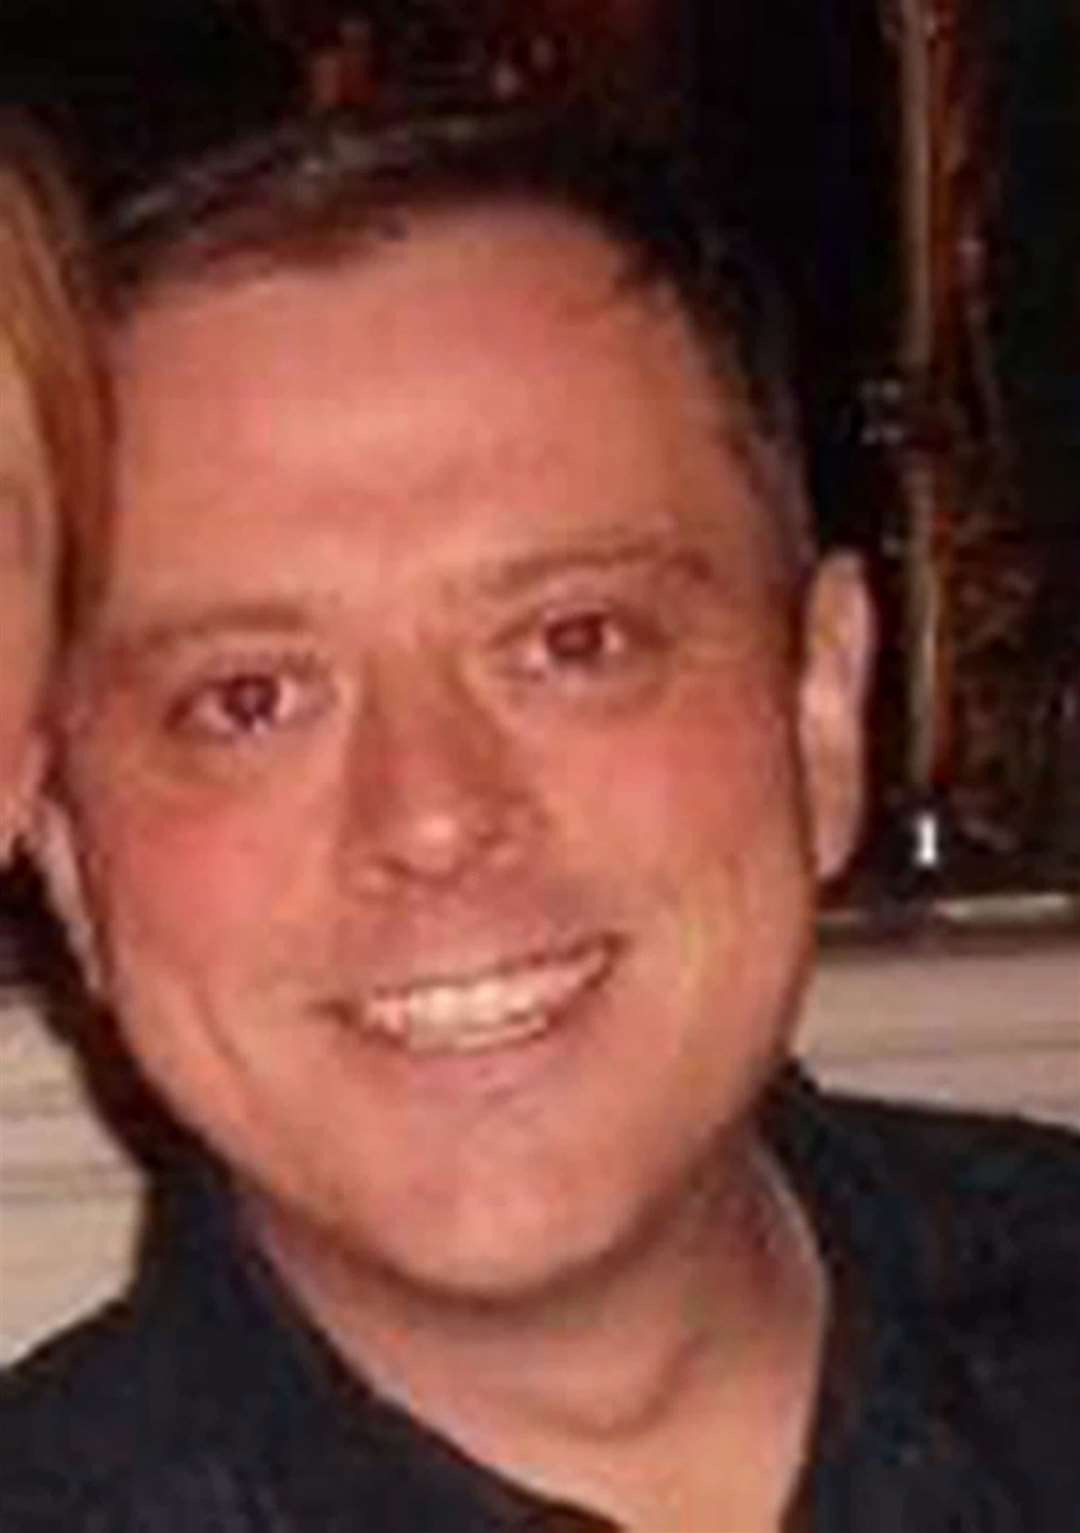 Victim Simon McHugh, whose mother addressed the court (West Yorkshire Police/PA)